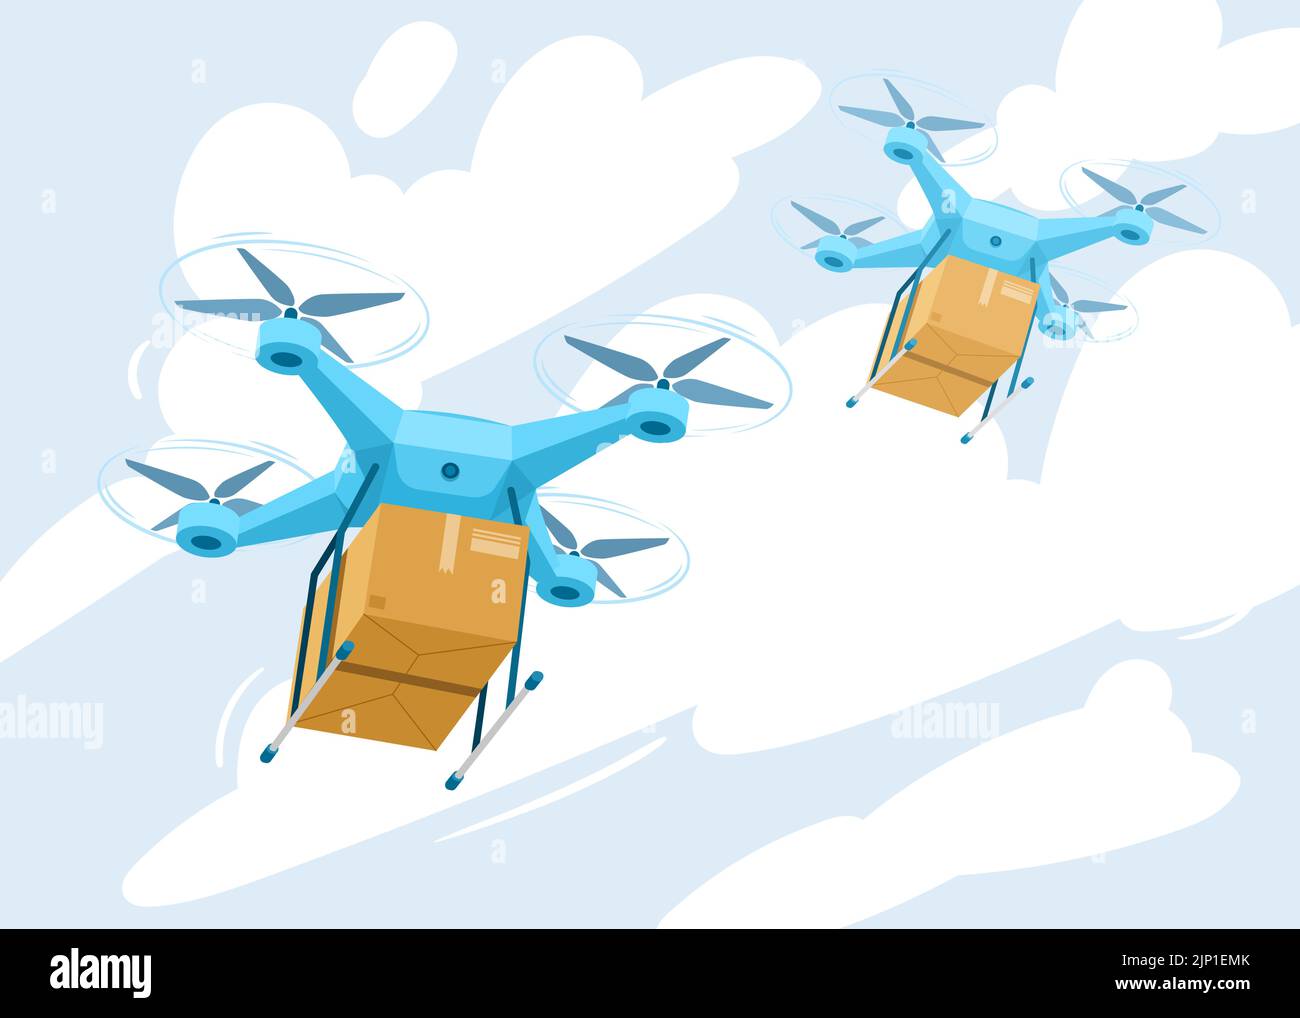 Drone for air delivery. Delivery flying robot drones, express robot shipment concept. Modern technologies in cargo transportation. Cartoon vector illustration. Stock Vector